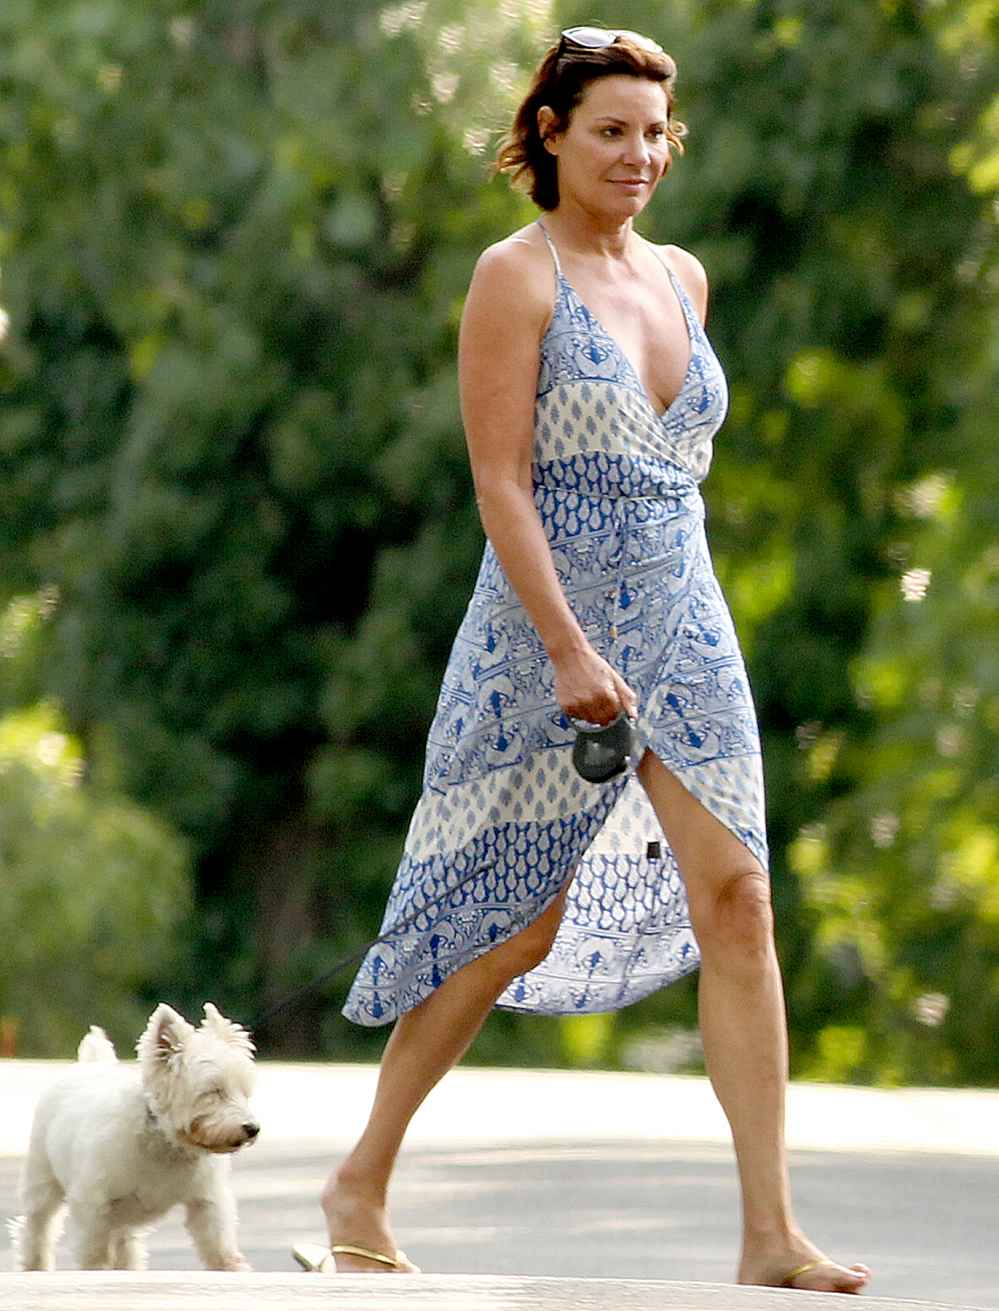 Countess Luann De Lesseps walking her dog with a friend in the Hamptons on August 23, 2017.